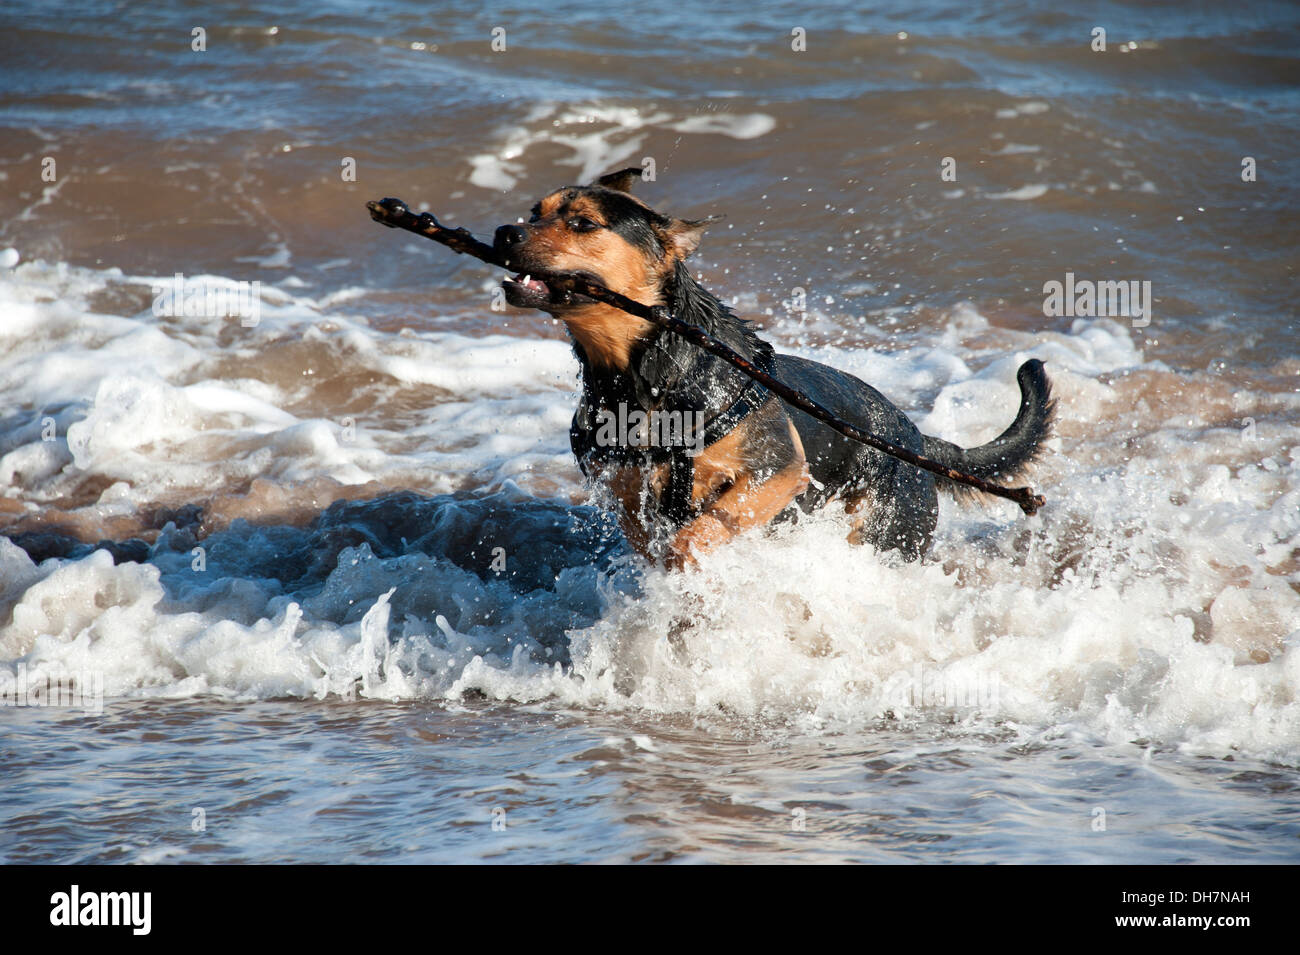 Dog catching stick in sea ocean water playing Stock Photo